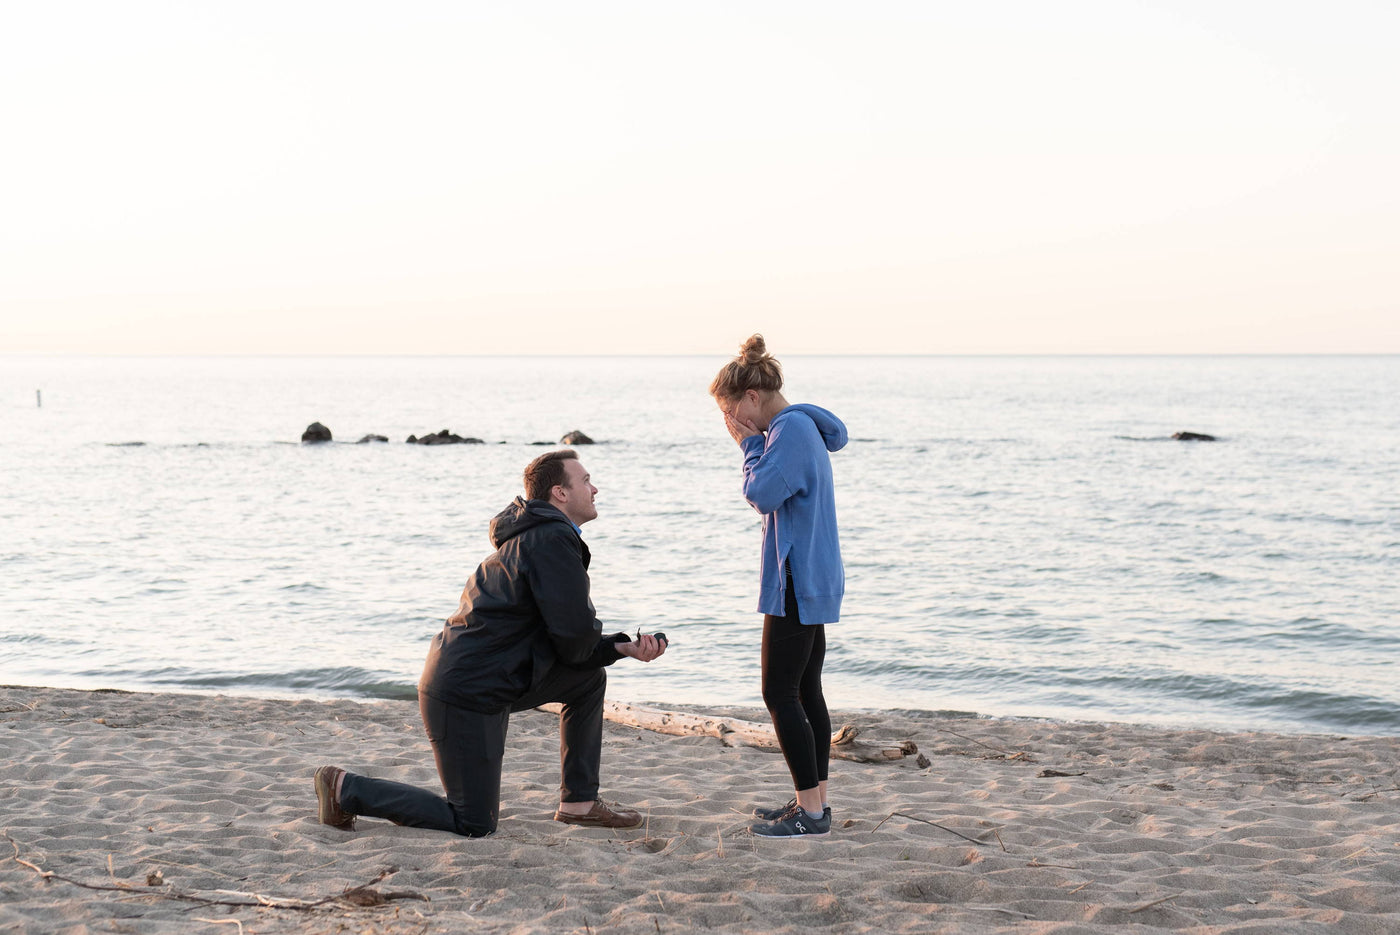 Carson Proposes to Michelle on the Beach with an Engagement Ring from Henne Jewelers